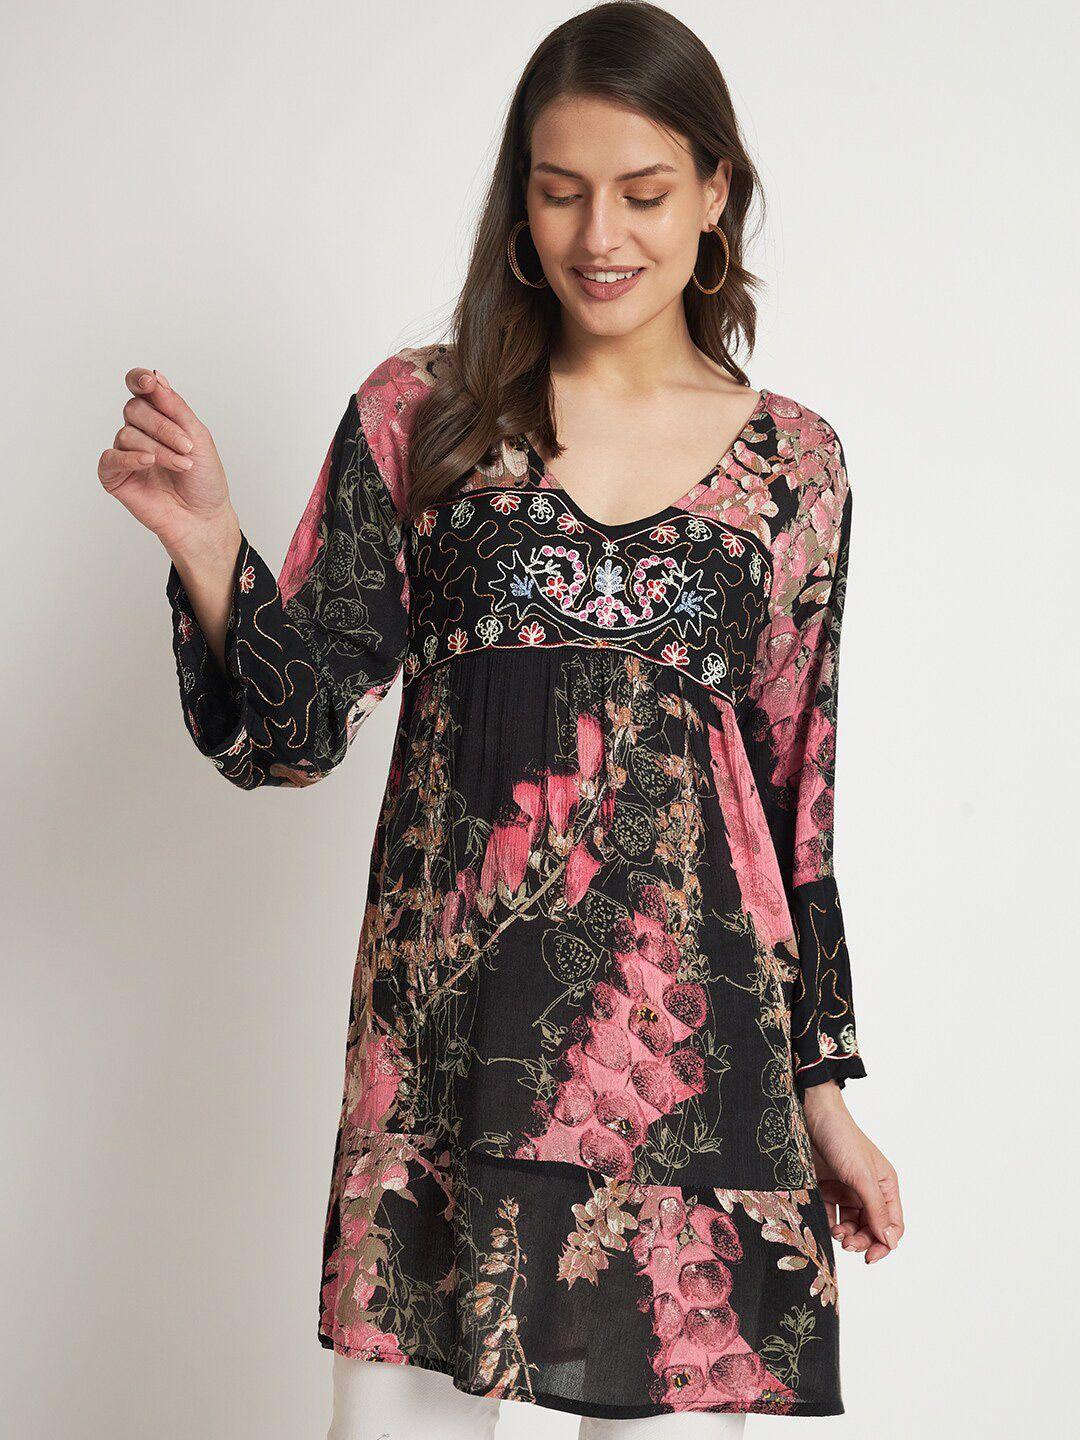 veldress ethnic motifs embroidered longline top